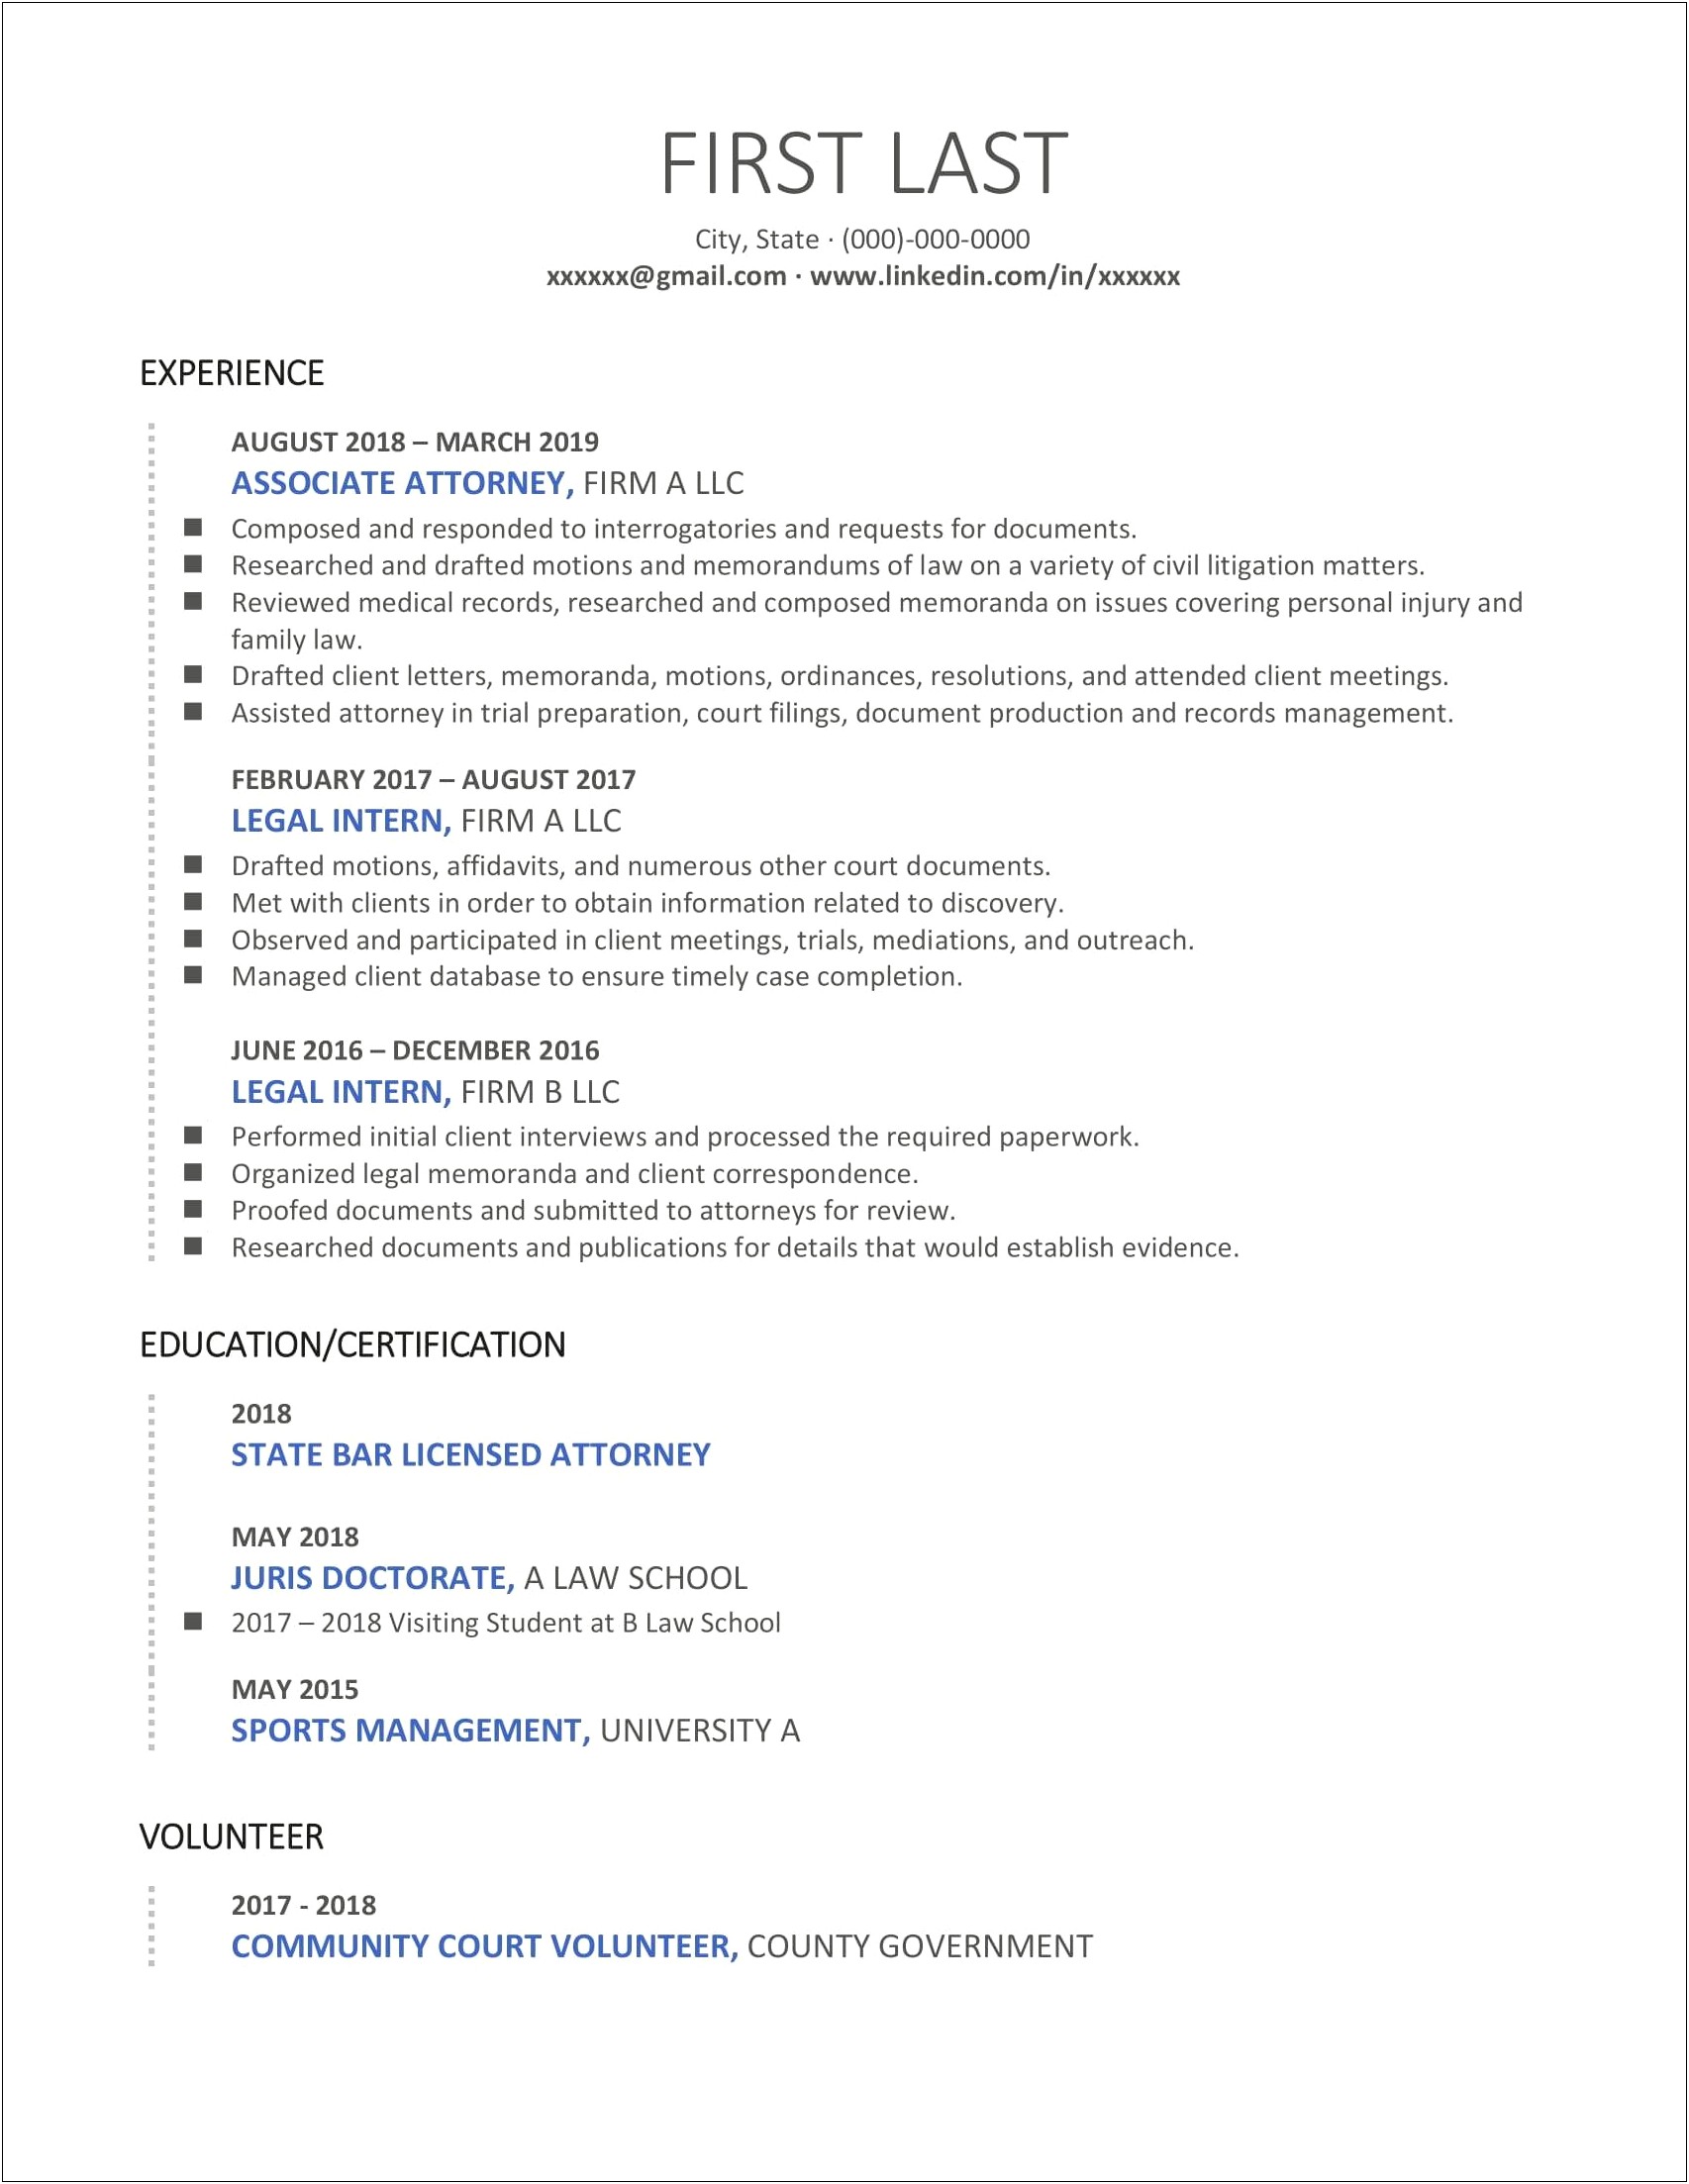 Where To Put Law Journal On Resume